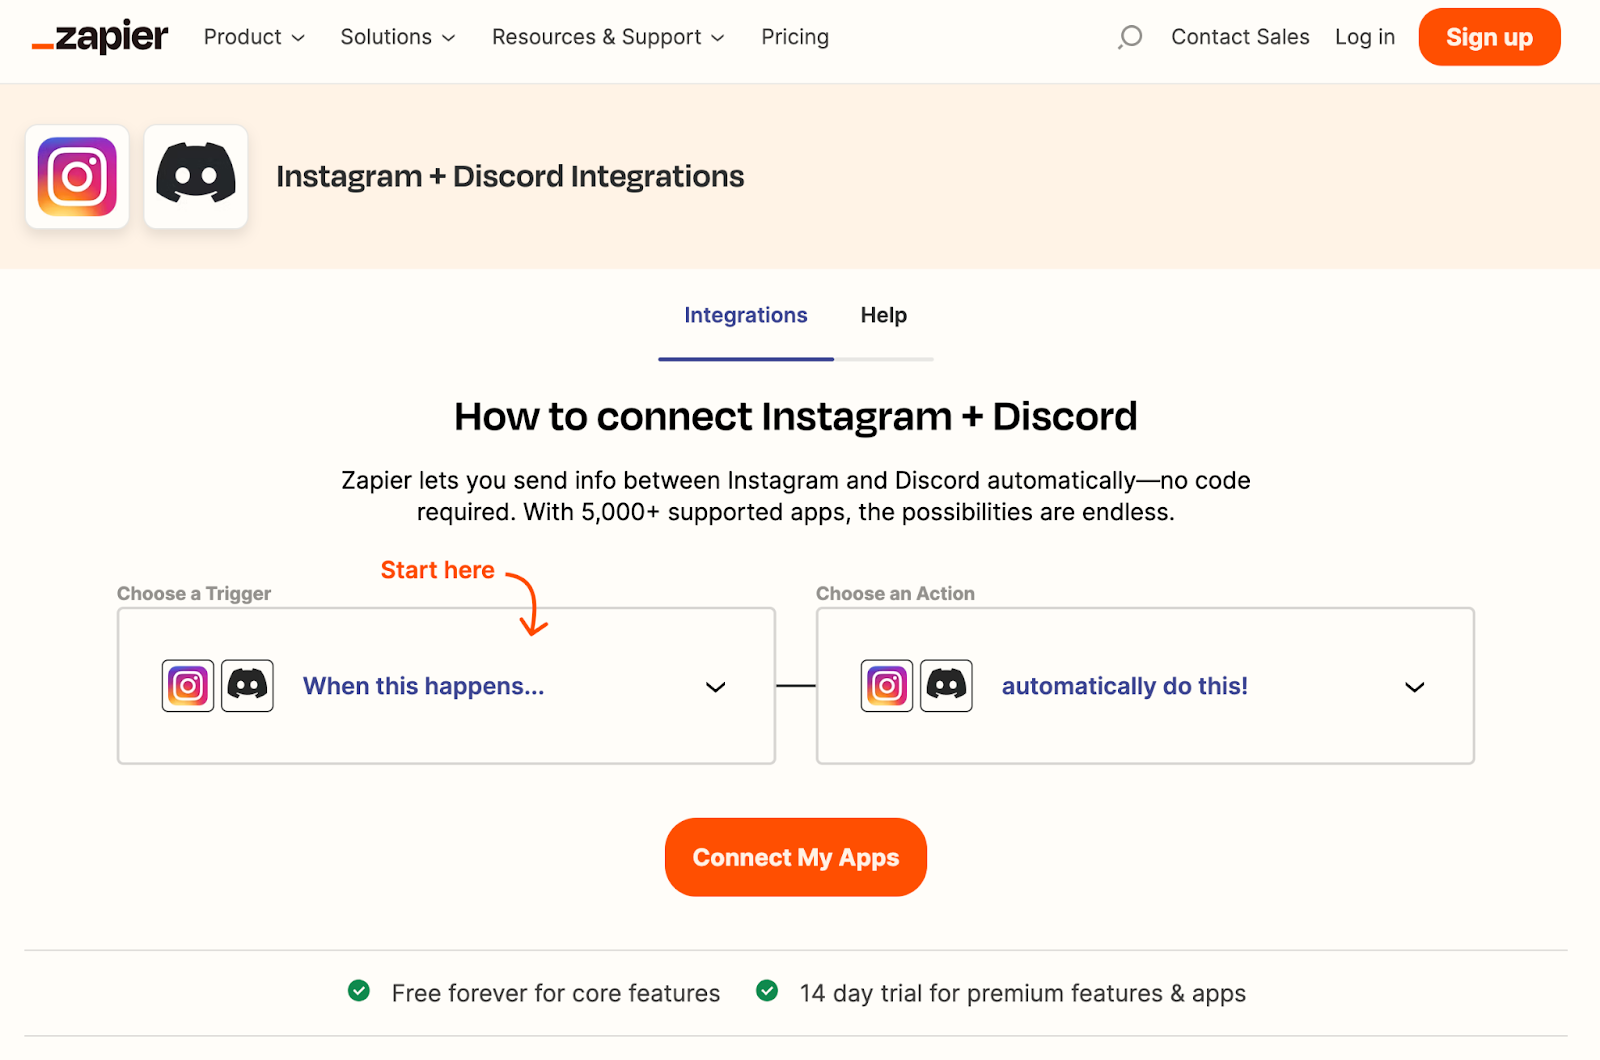 Zapier's "How to connect Instagram + Discord" page